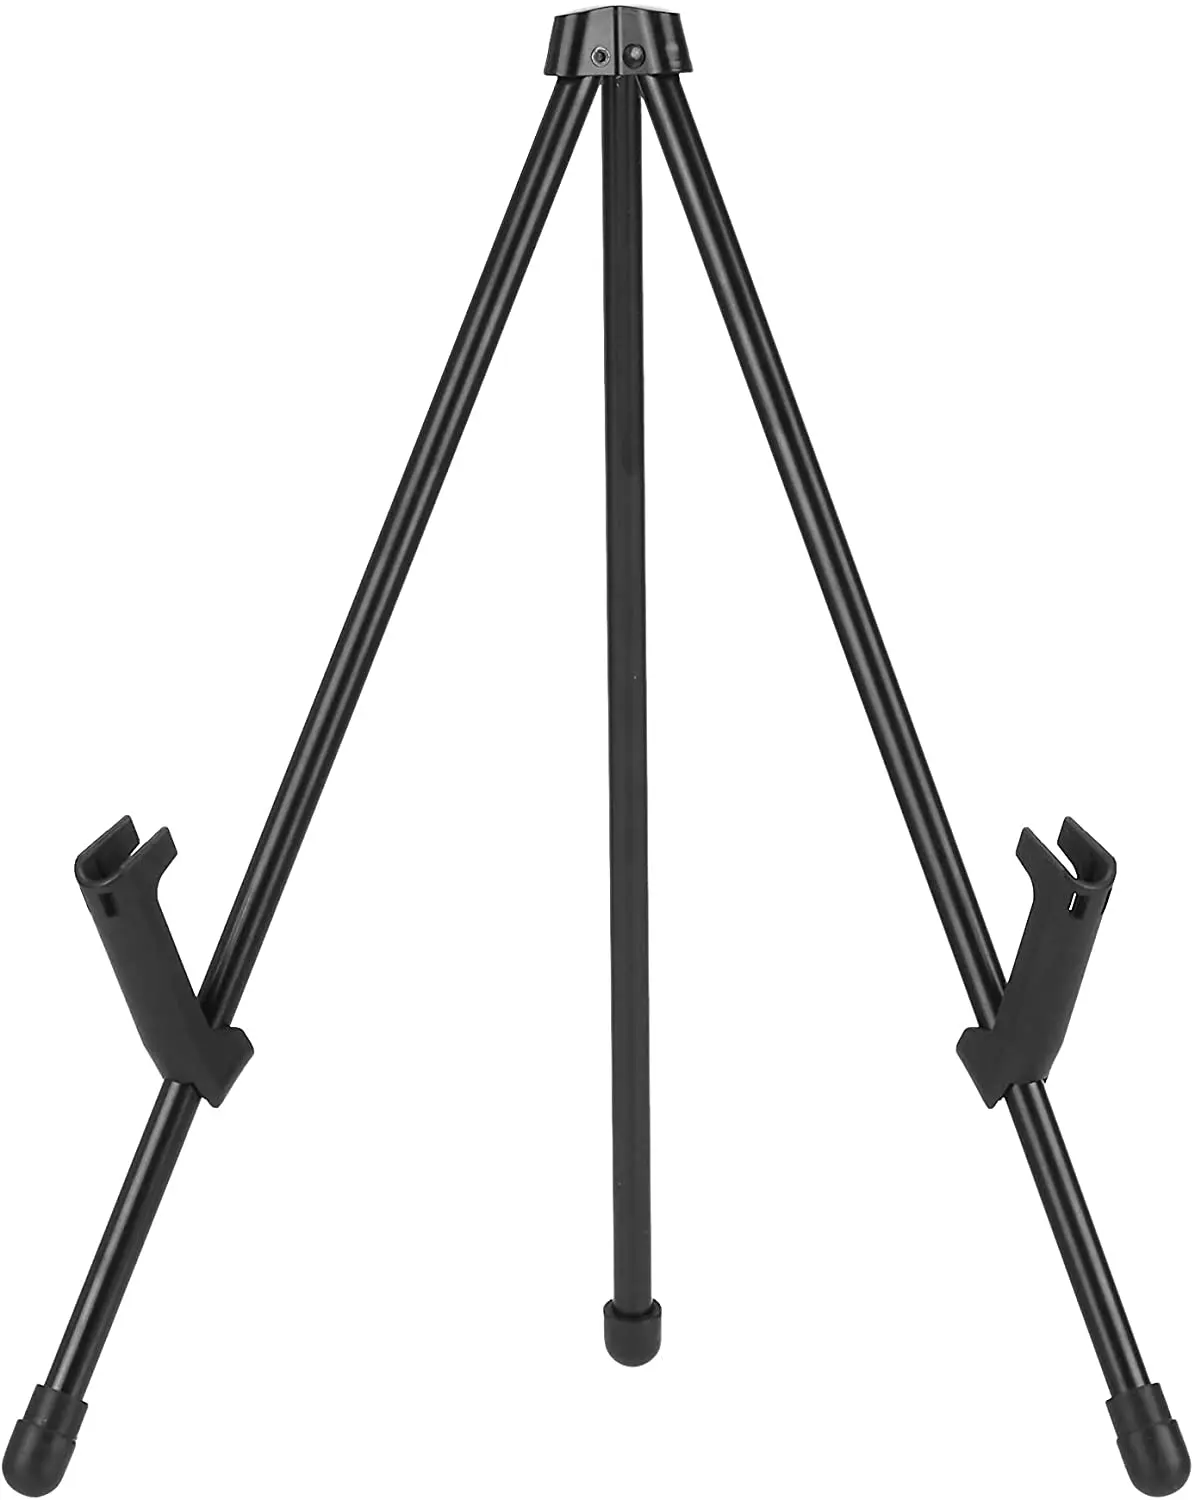 Tabletop Instant Easel – Tripod, Supports 5 lbs